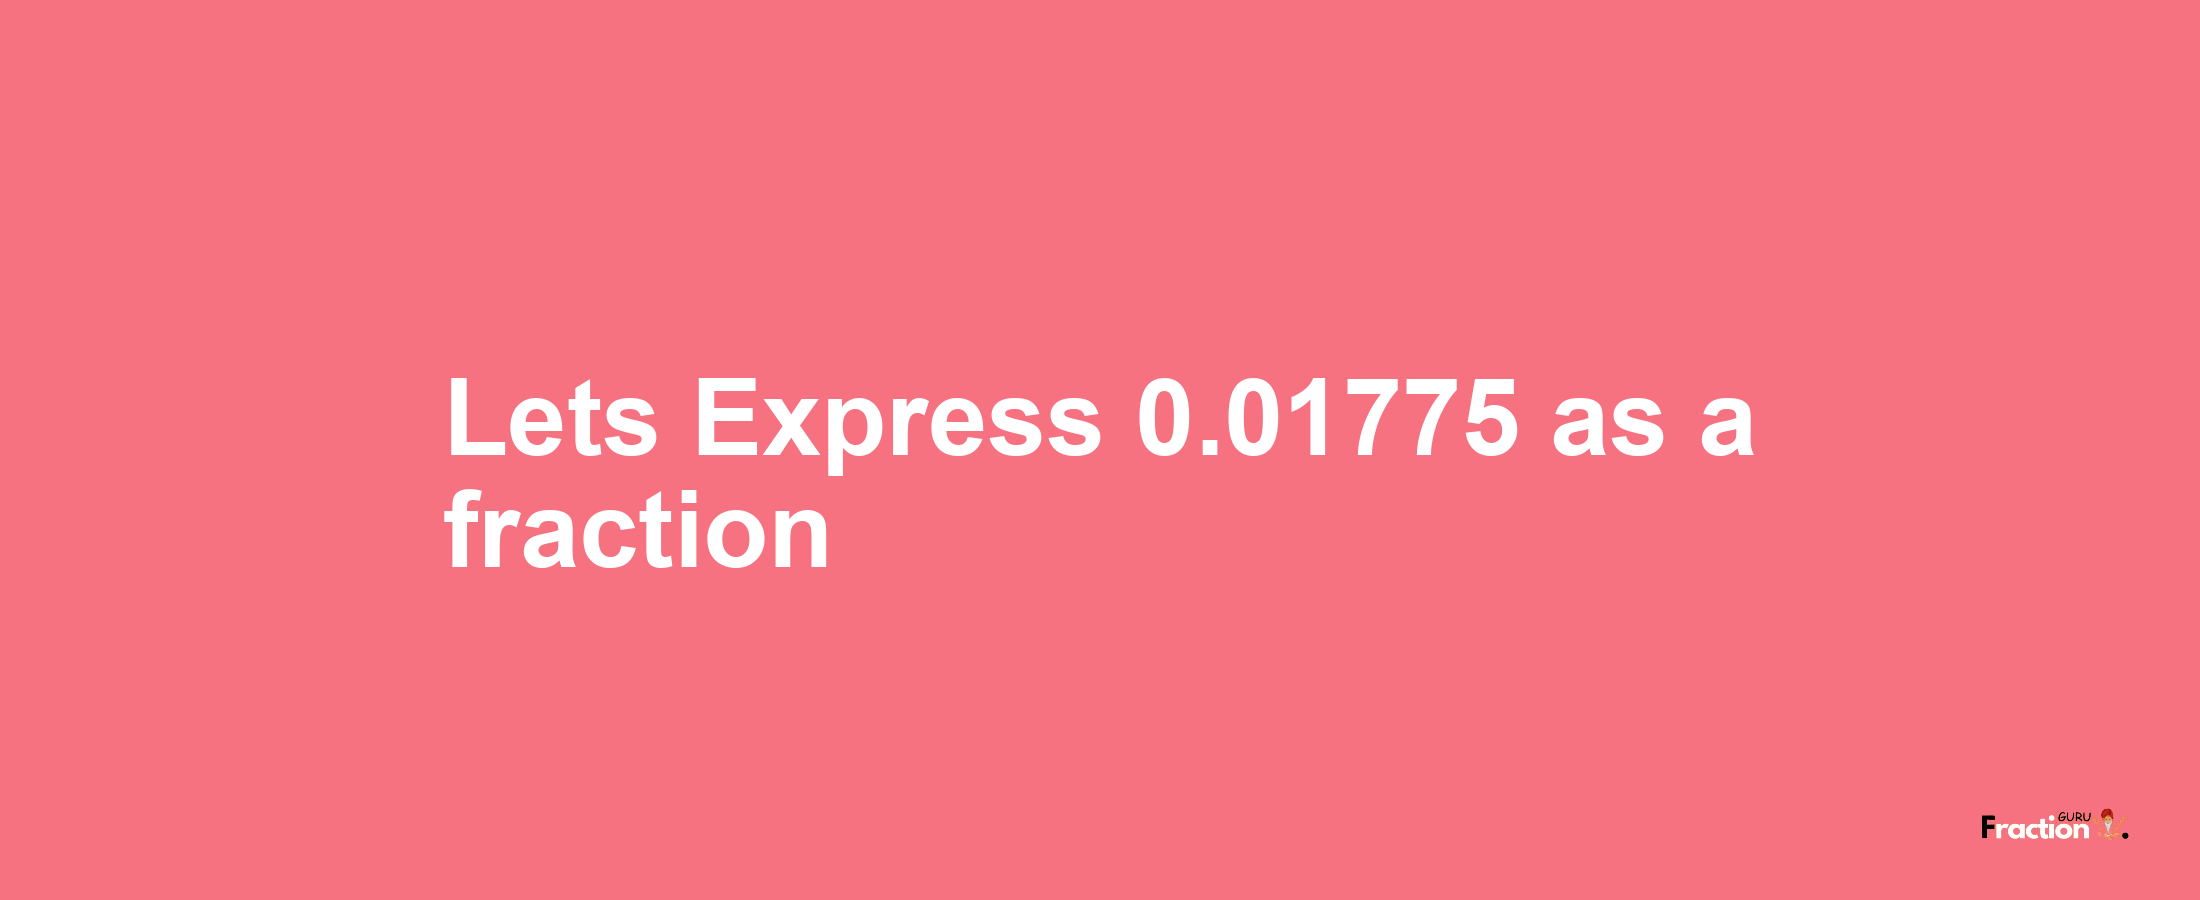 Lets Express 0.01775 as afraction